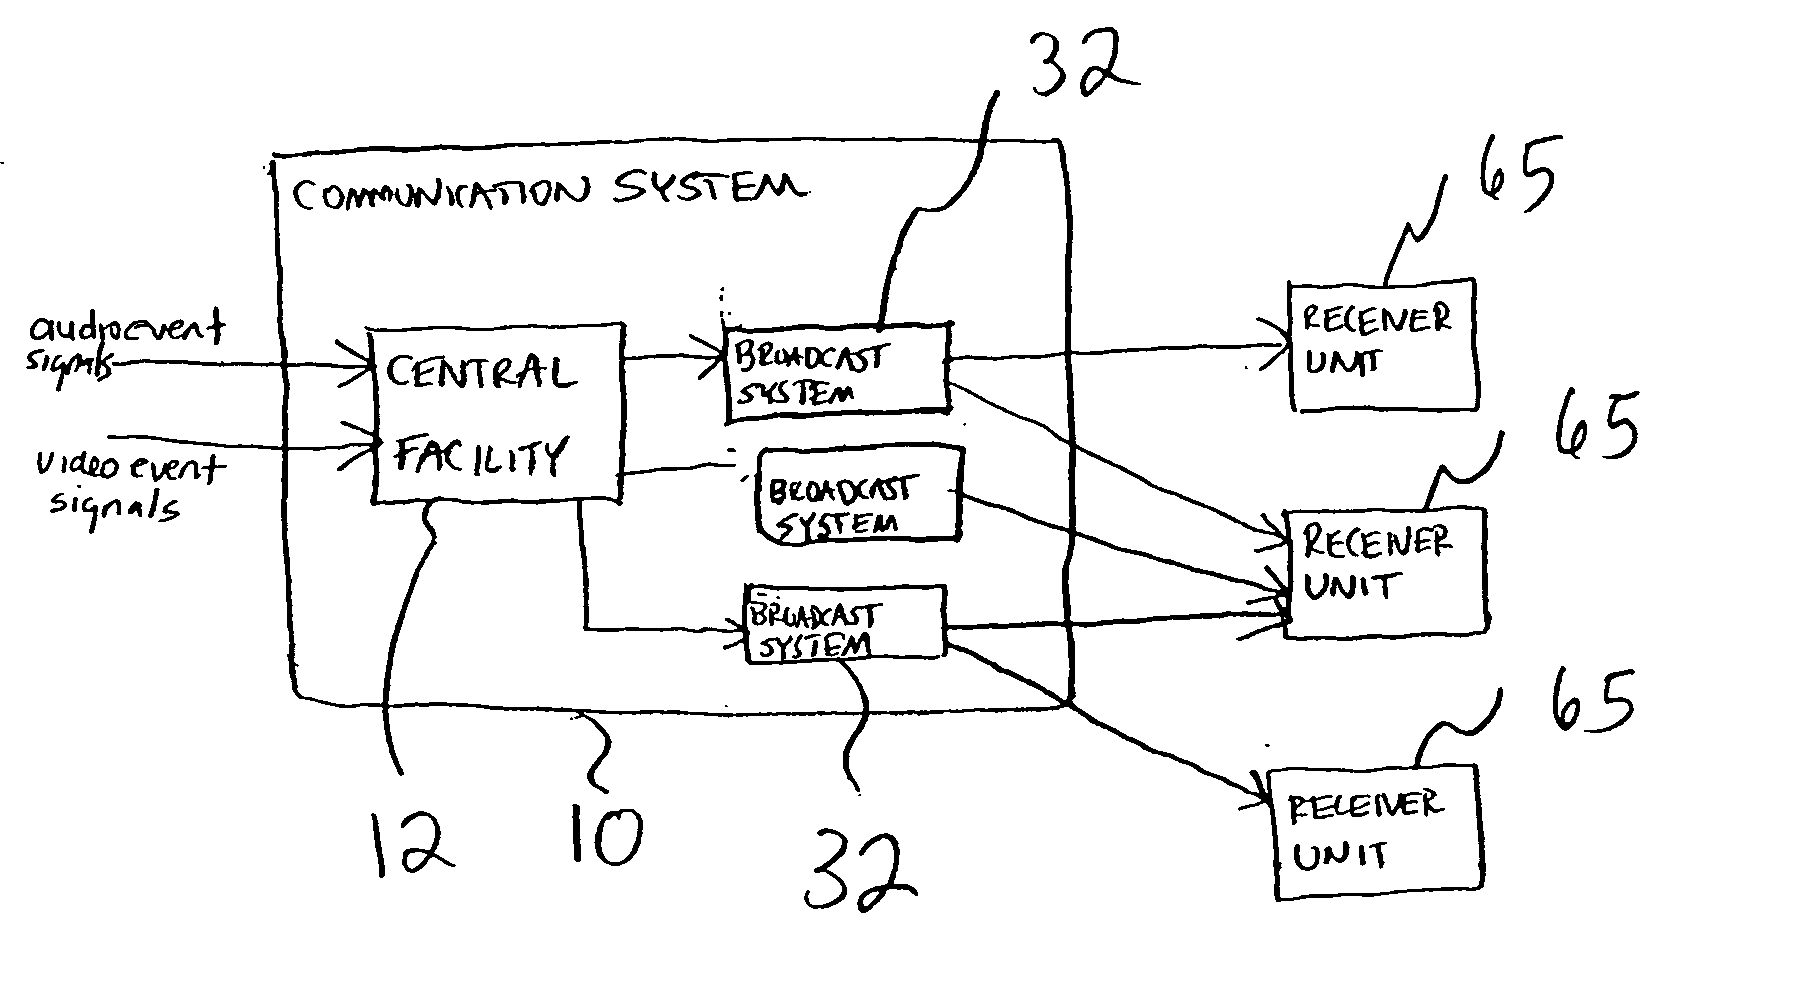 System and method for providing event spectators with audio/video signals pertaining to remote events